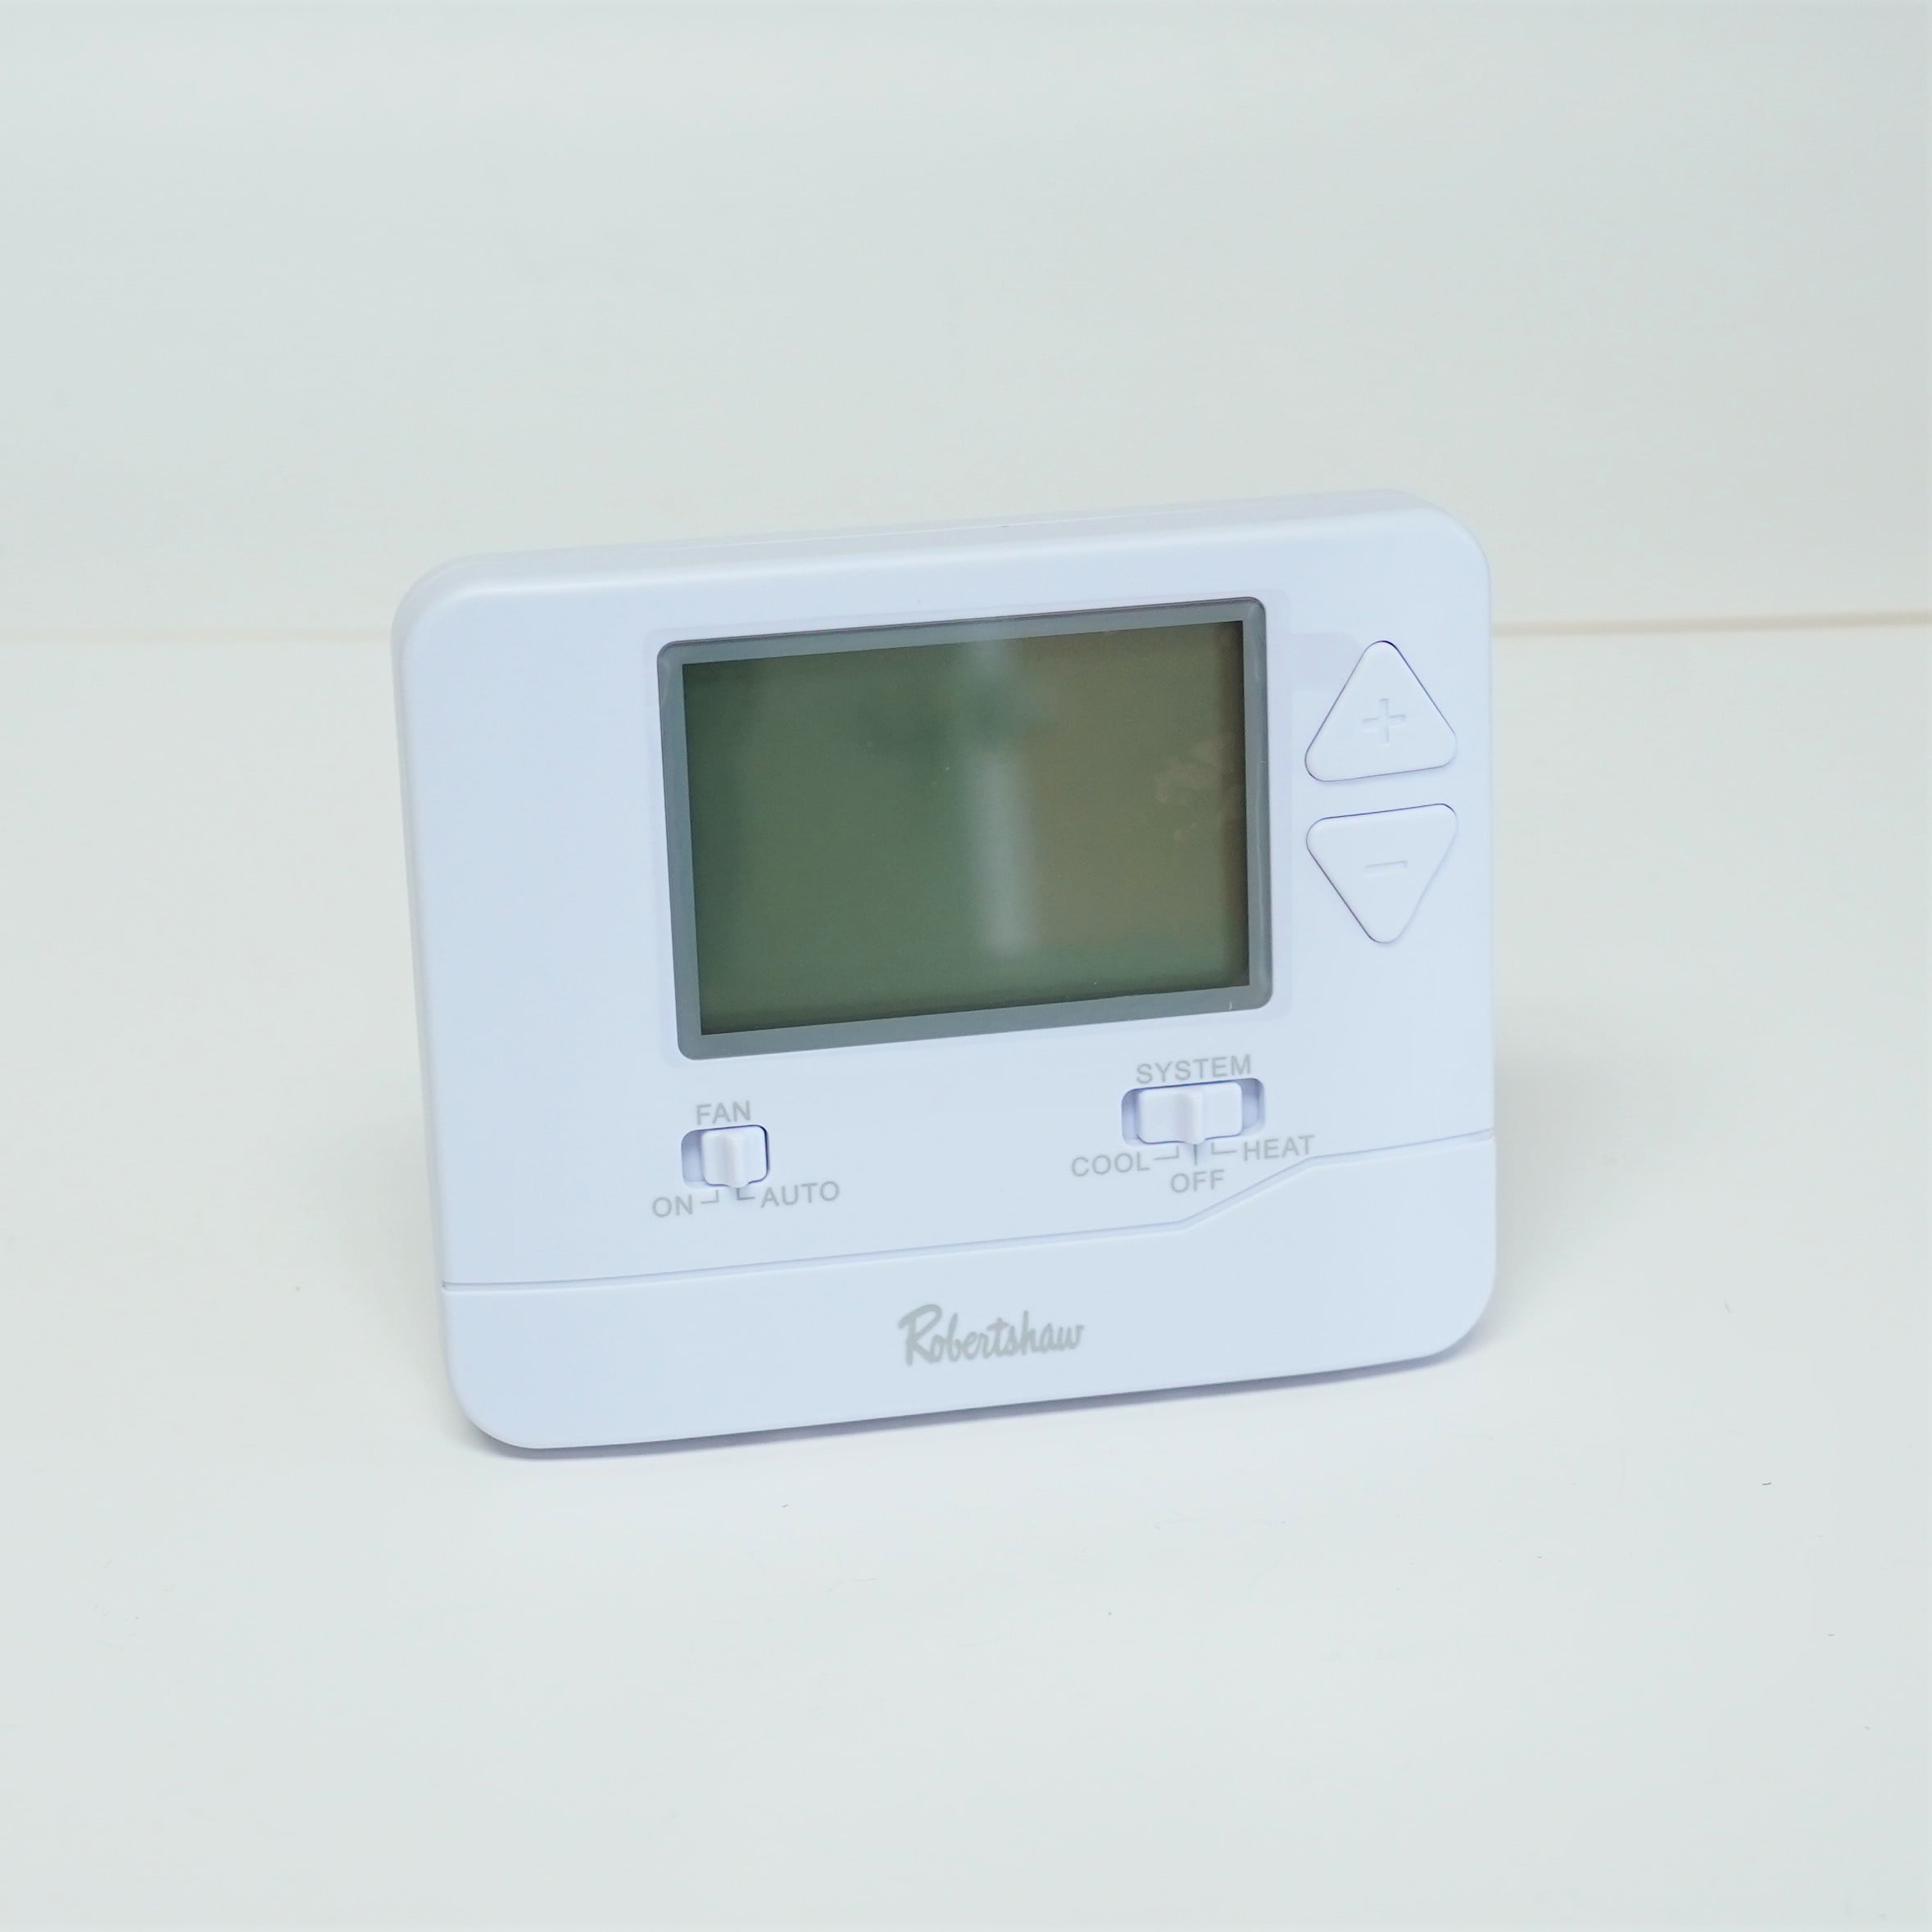 Robertshaw RS8210 Non-Programmable Multi-Stage 2H/1C Wall Thermostat